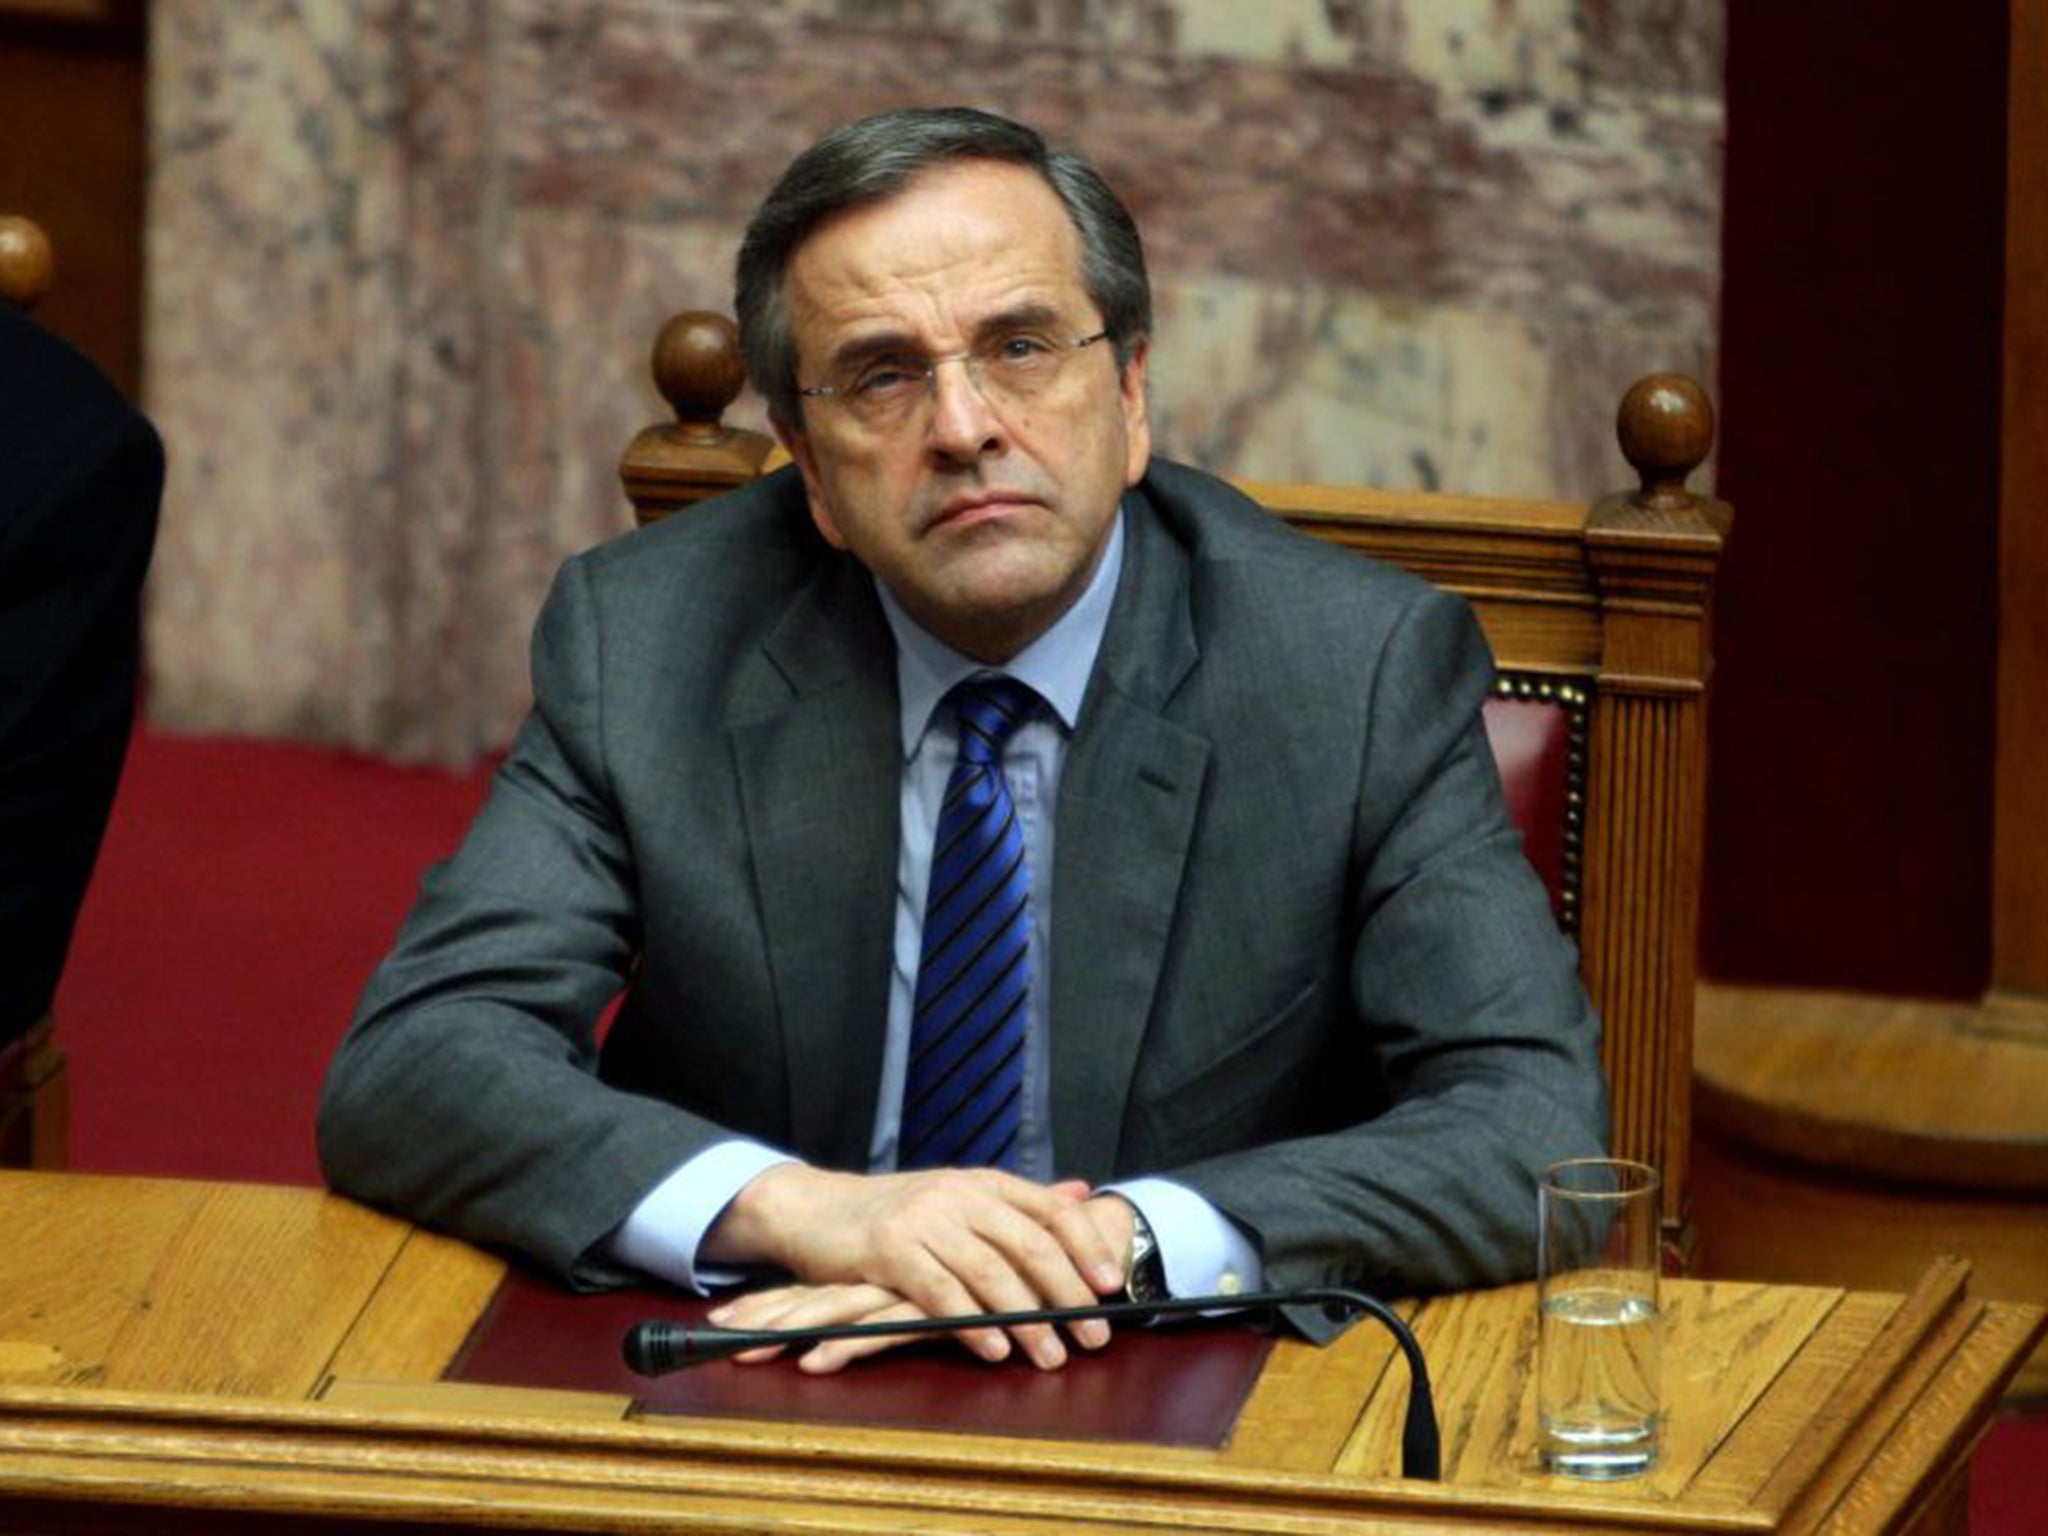 Prime Minister Antonis Samaras said a snap election will create a ‘national danger’